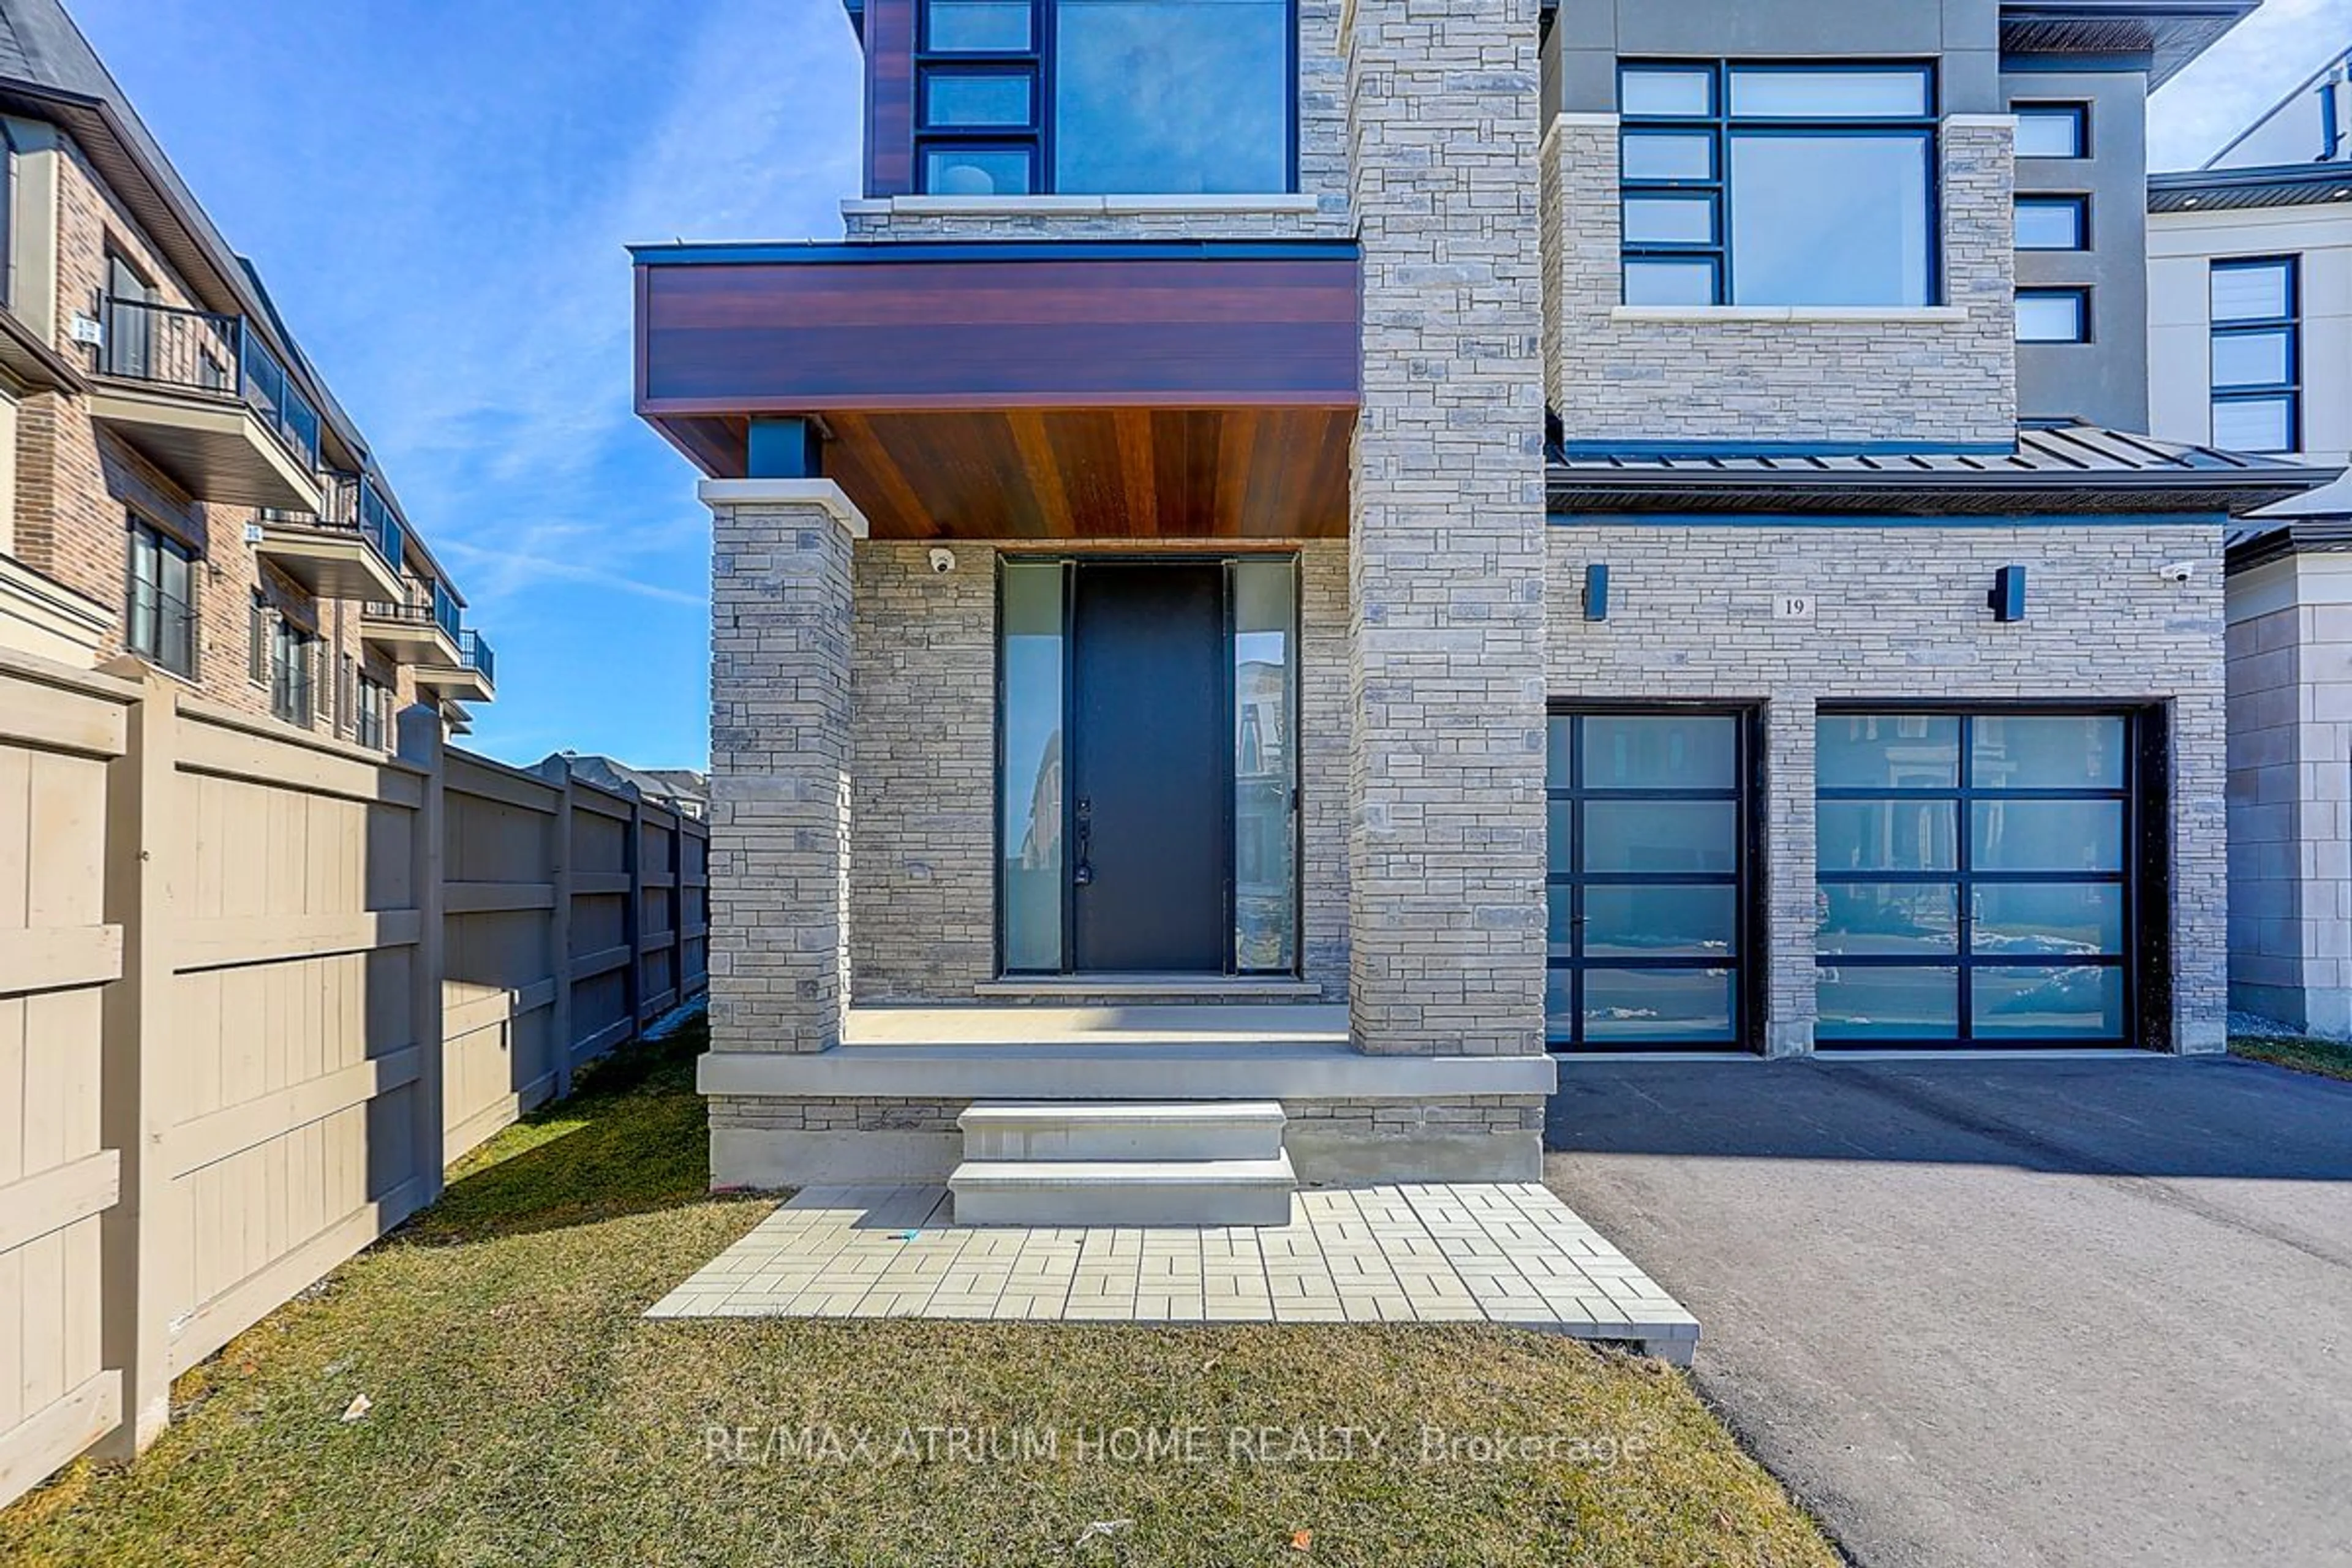 Home with brick exterior material for 19 Seager St, Richmond Hill Ontario L4S 0H1